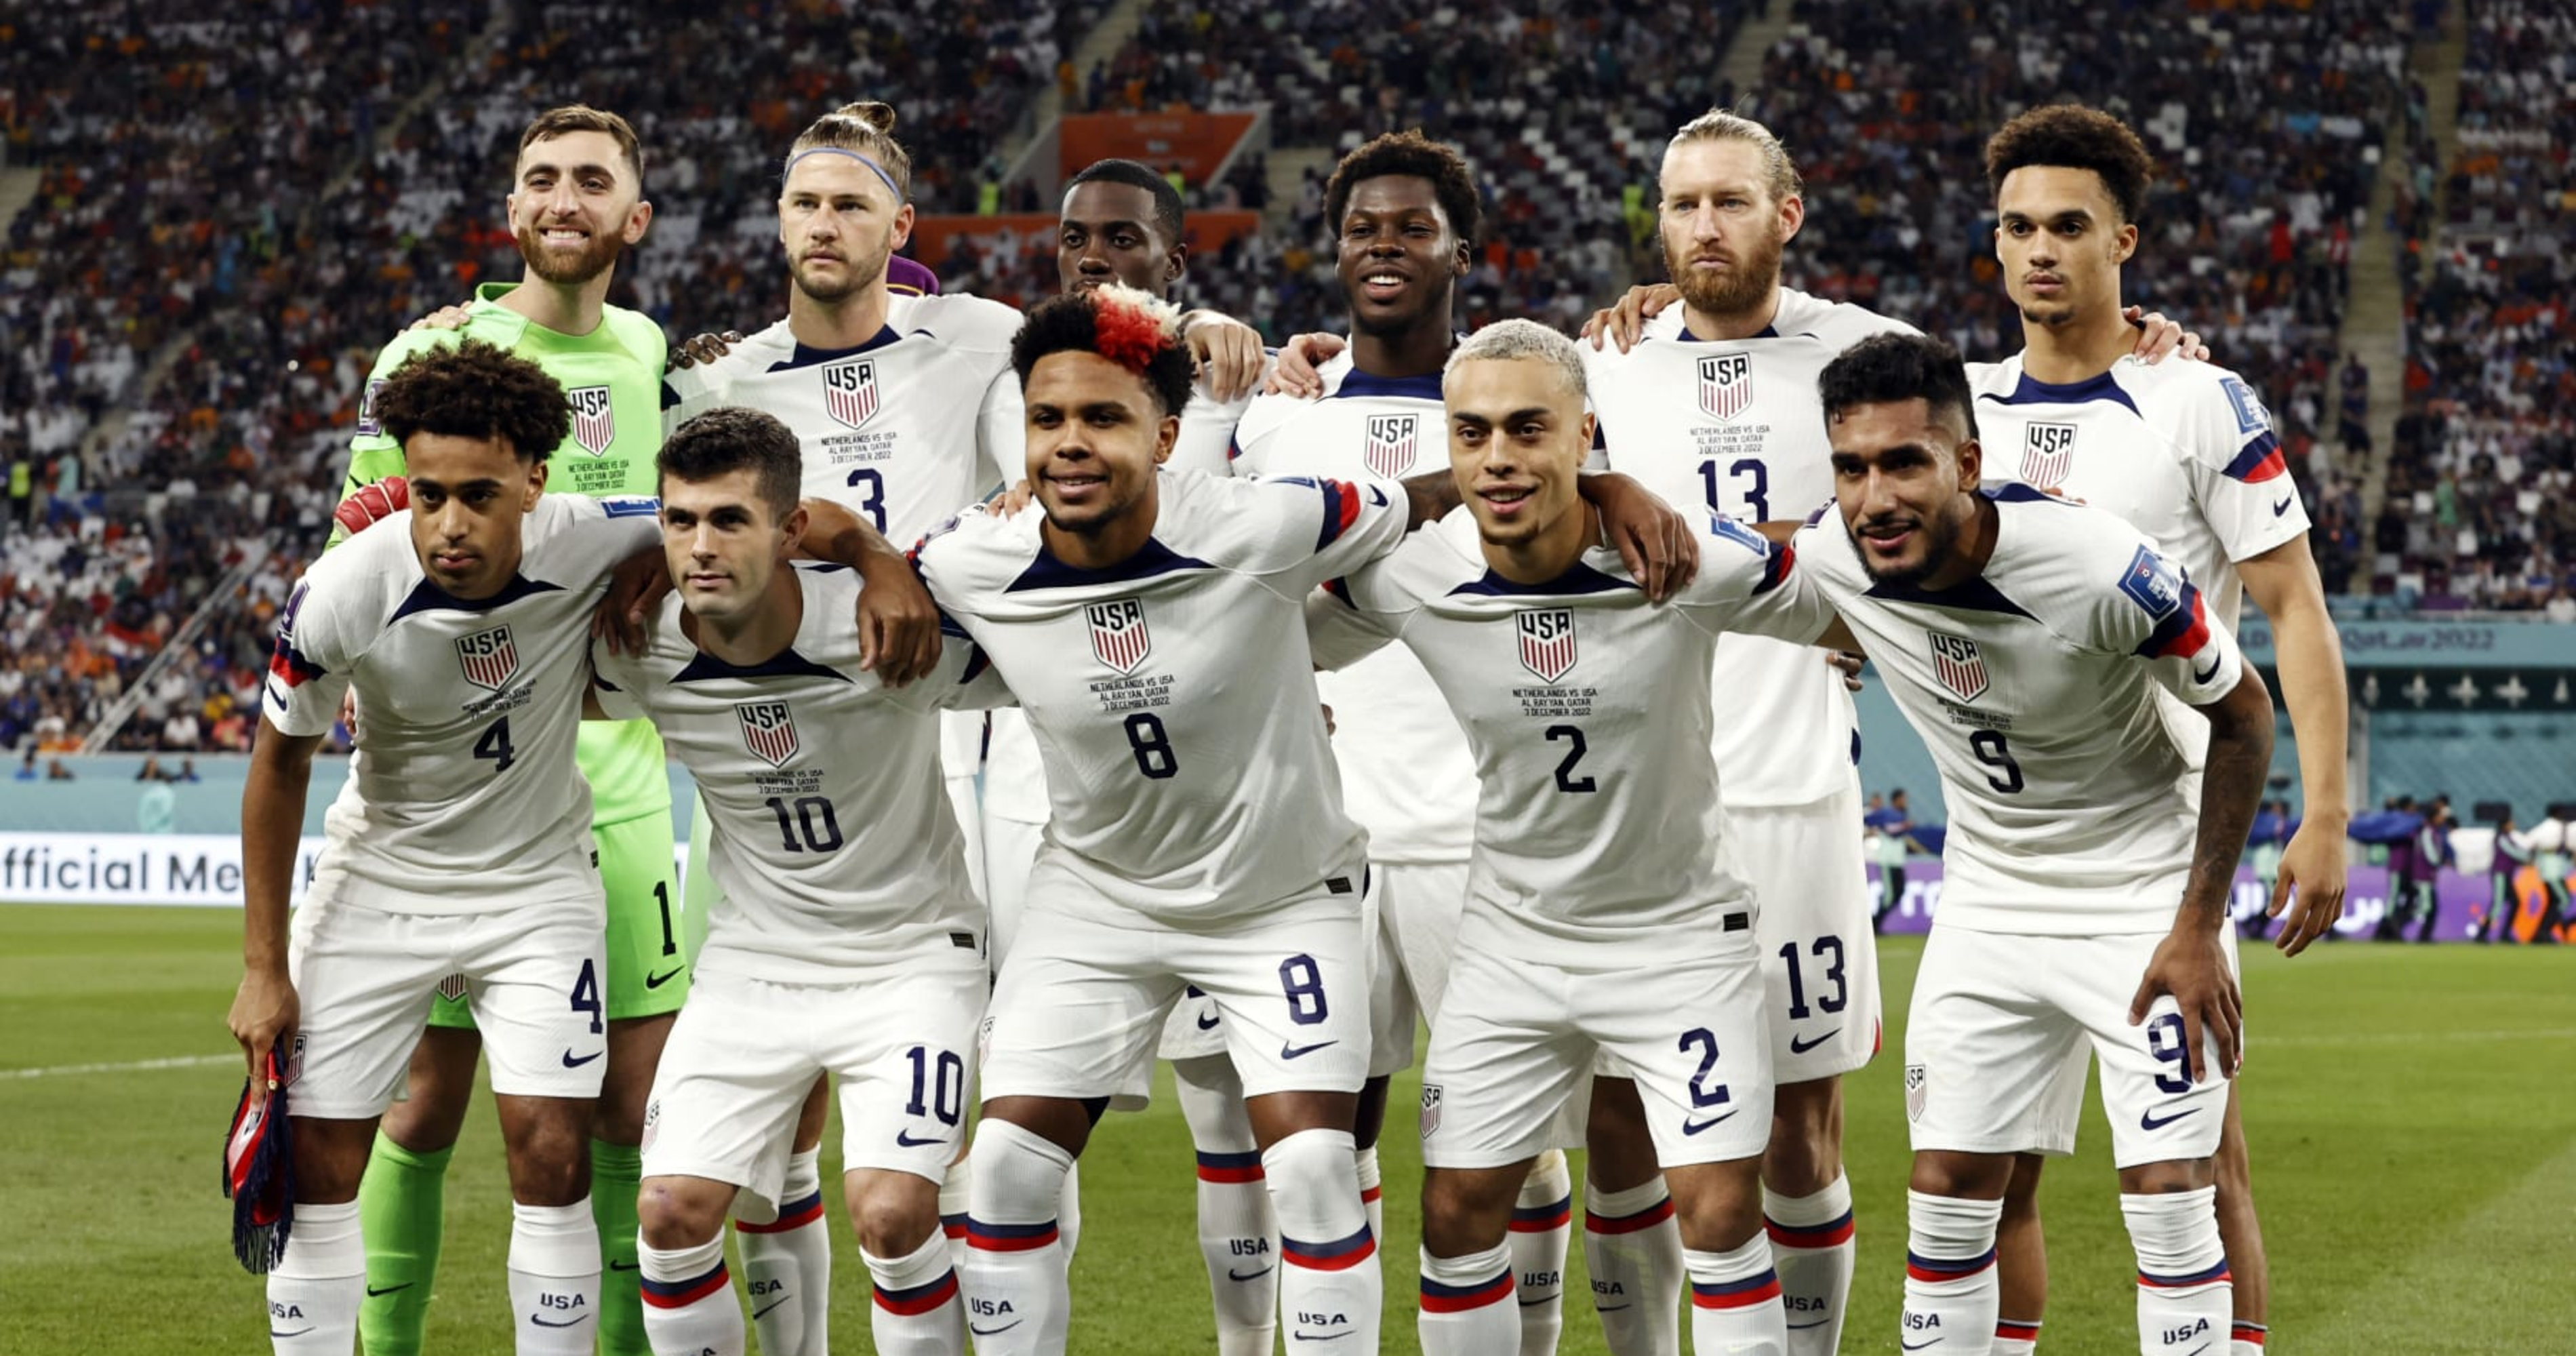 5 Takeaways from the USMNT's Run at the 2022 World Cup